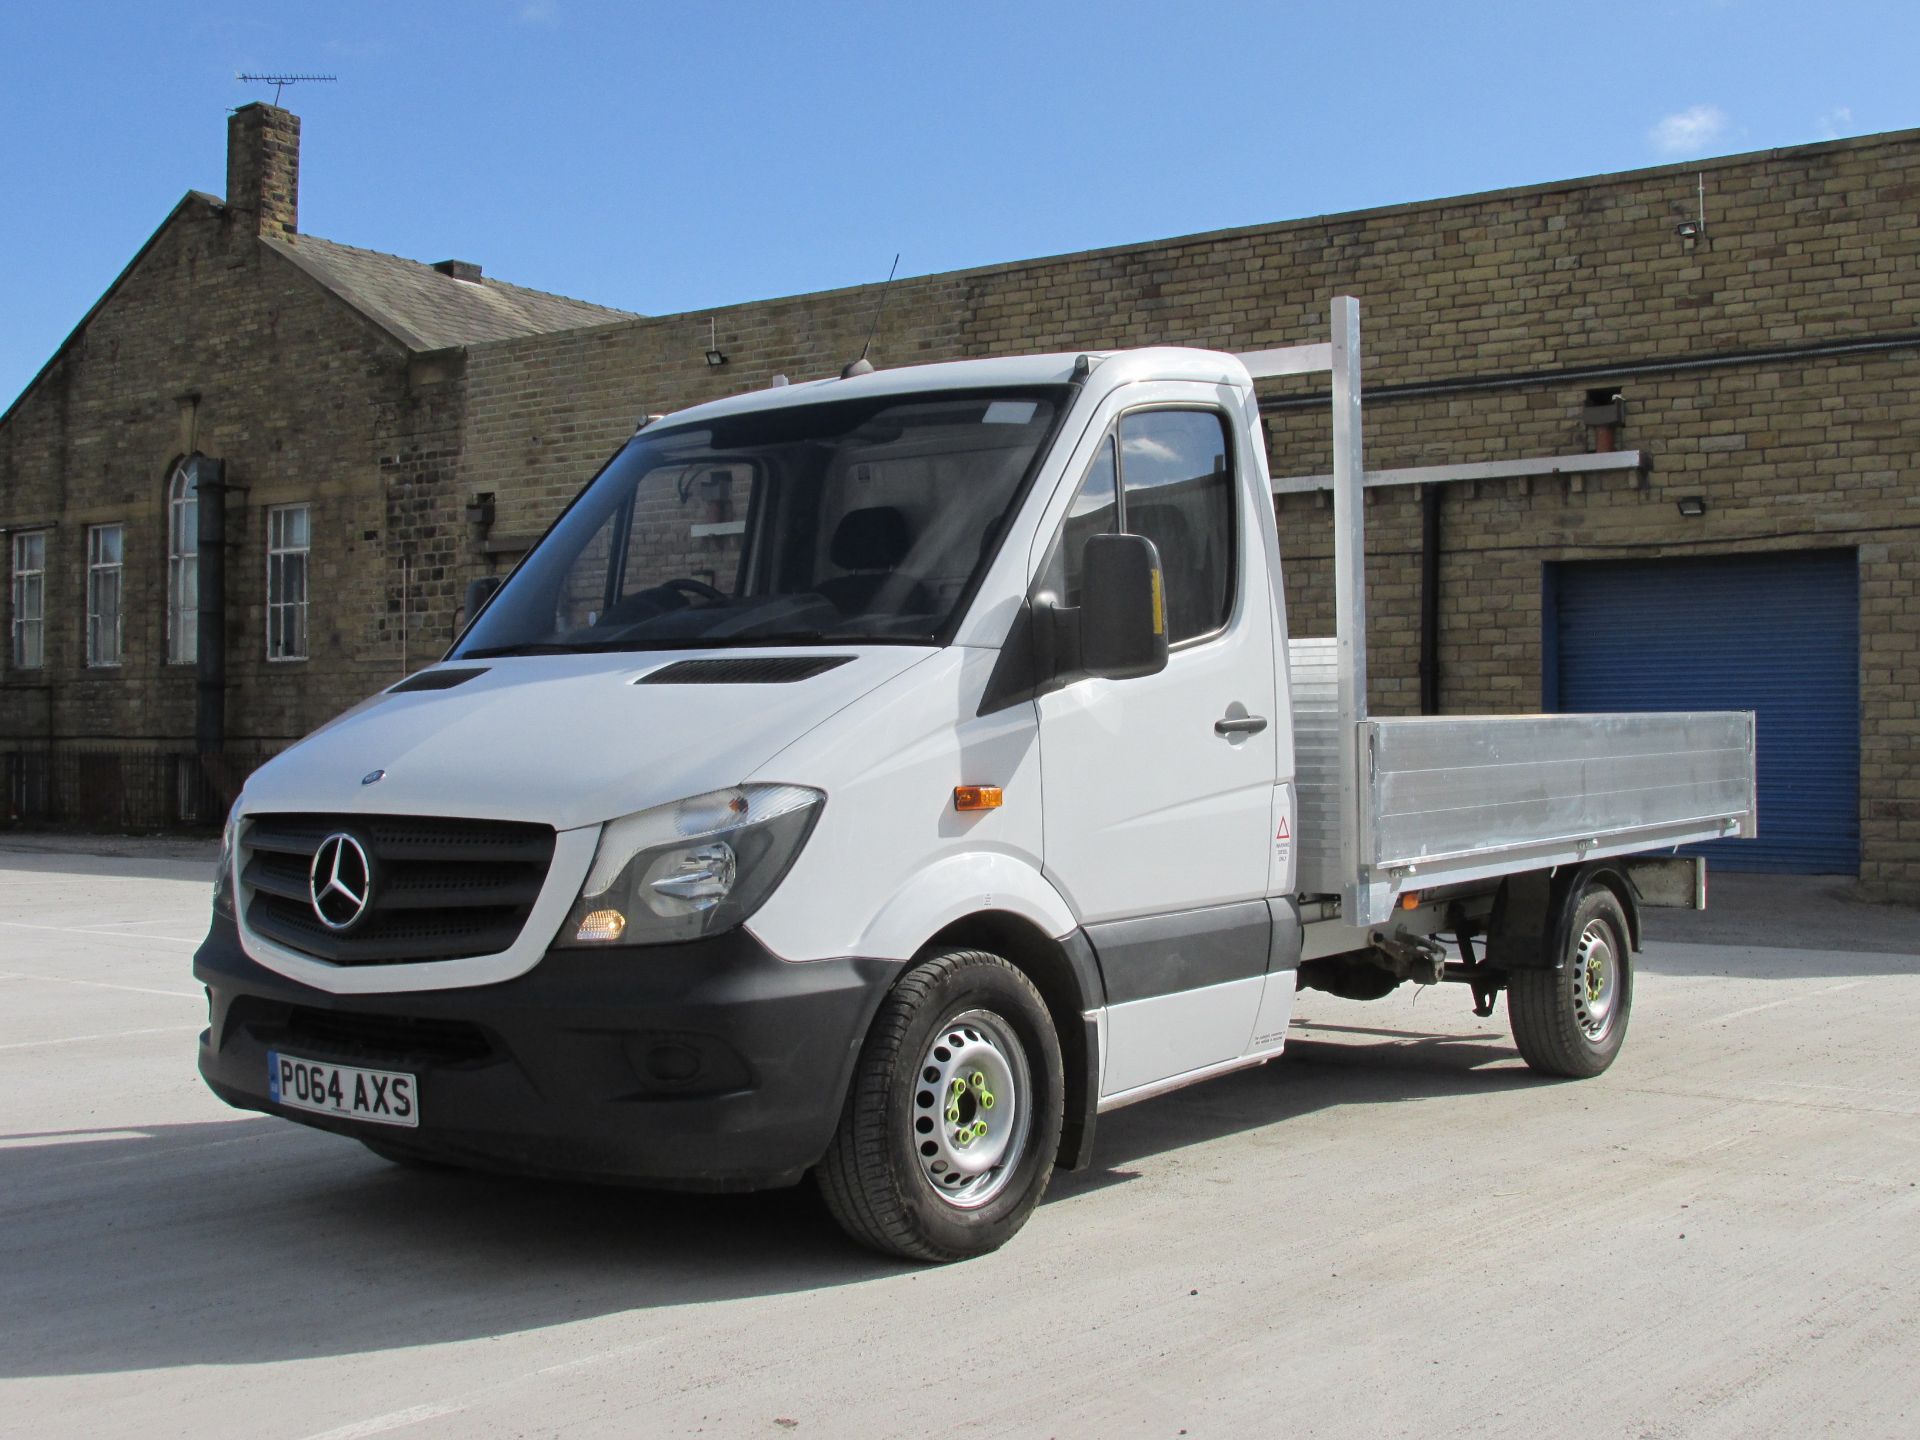 2014 Mercedes sprinter 313 Cdi dropside - 128630 Miles Warranted - Image 3 of 9